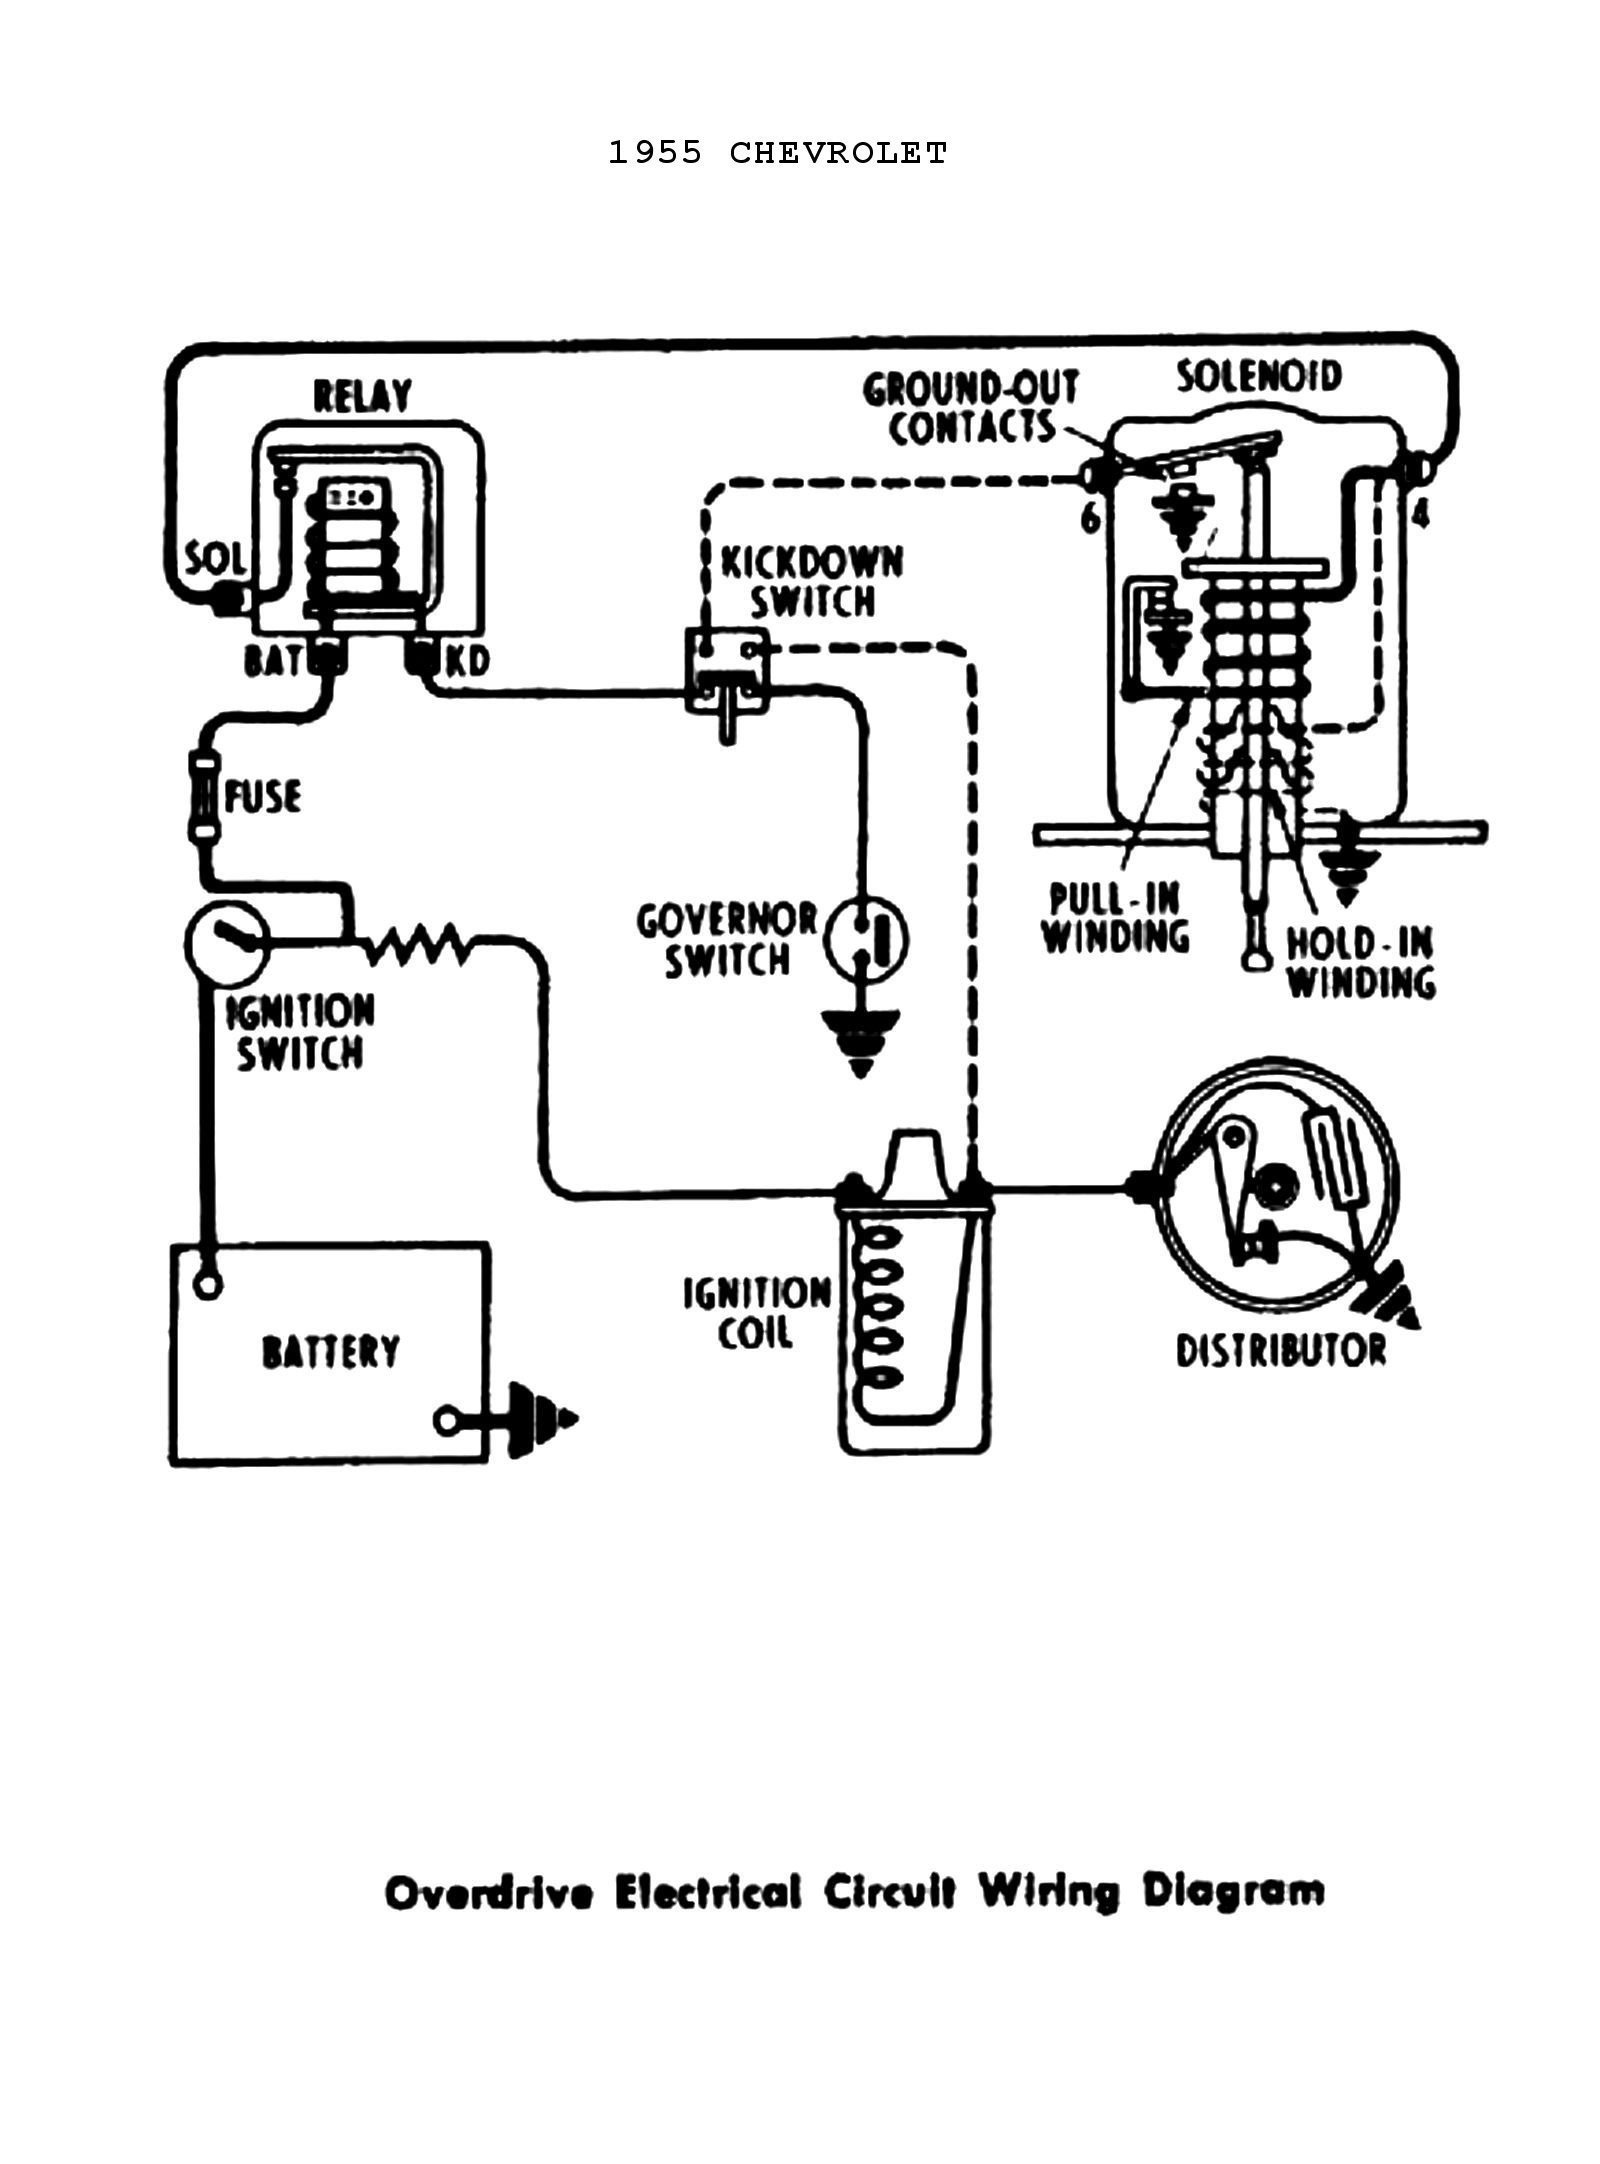 Band Heater Wiring Diagram Auto Diagrams Instructions